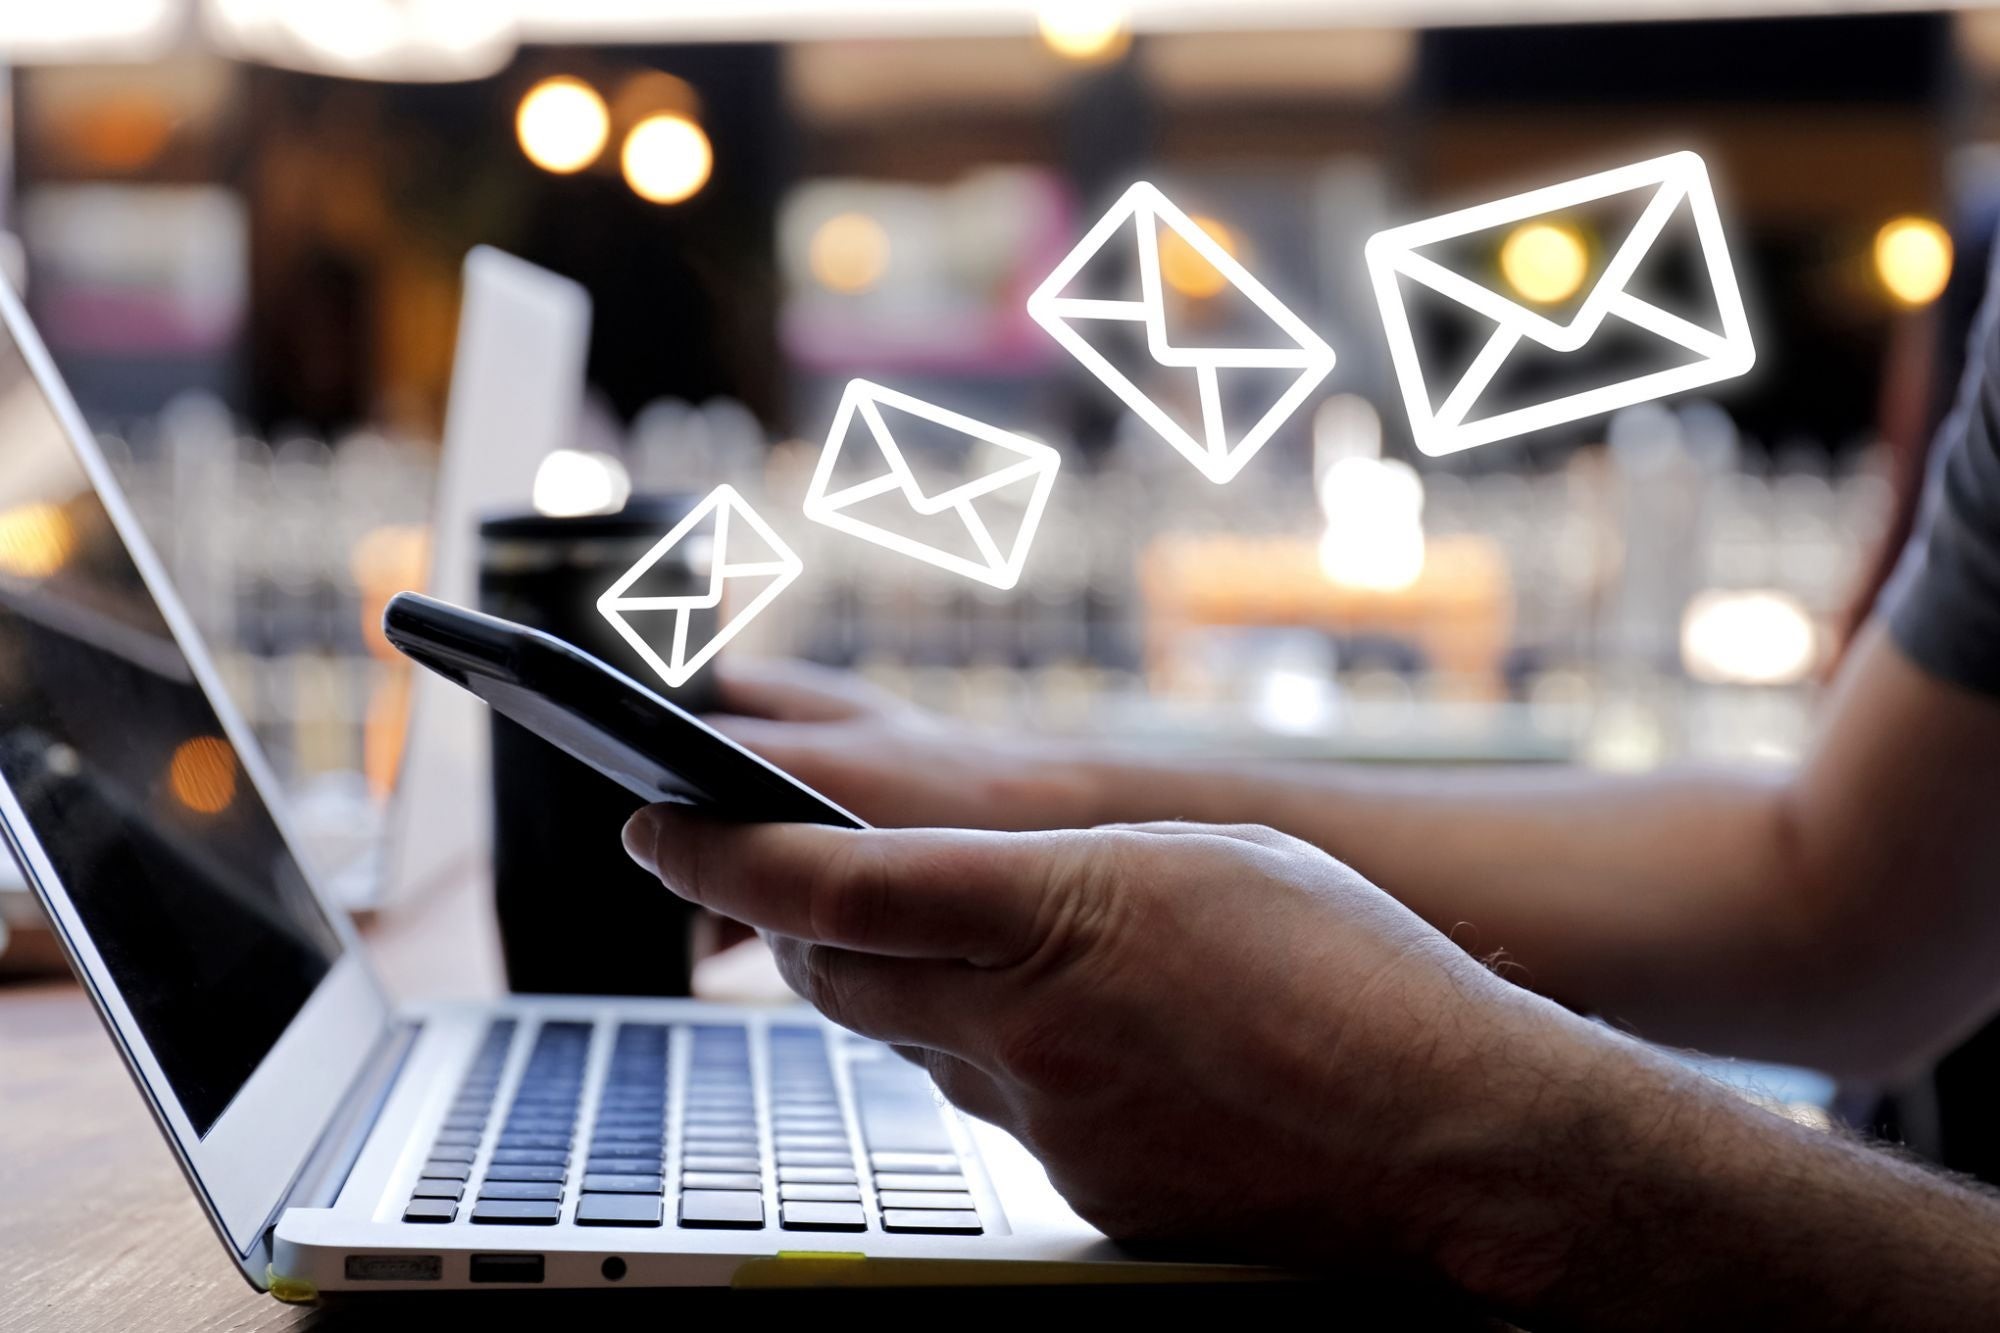 12 Email Marketing Ideas for Small Business